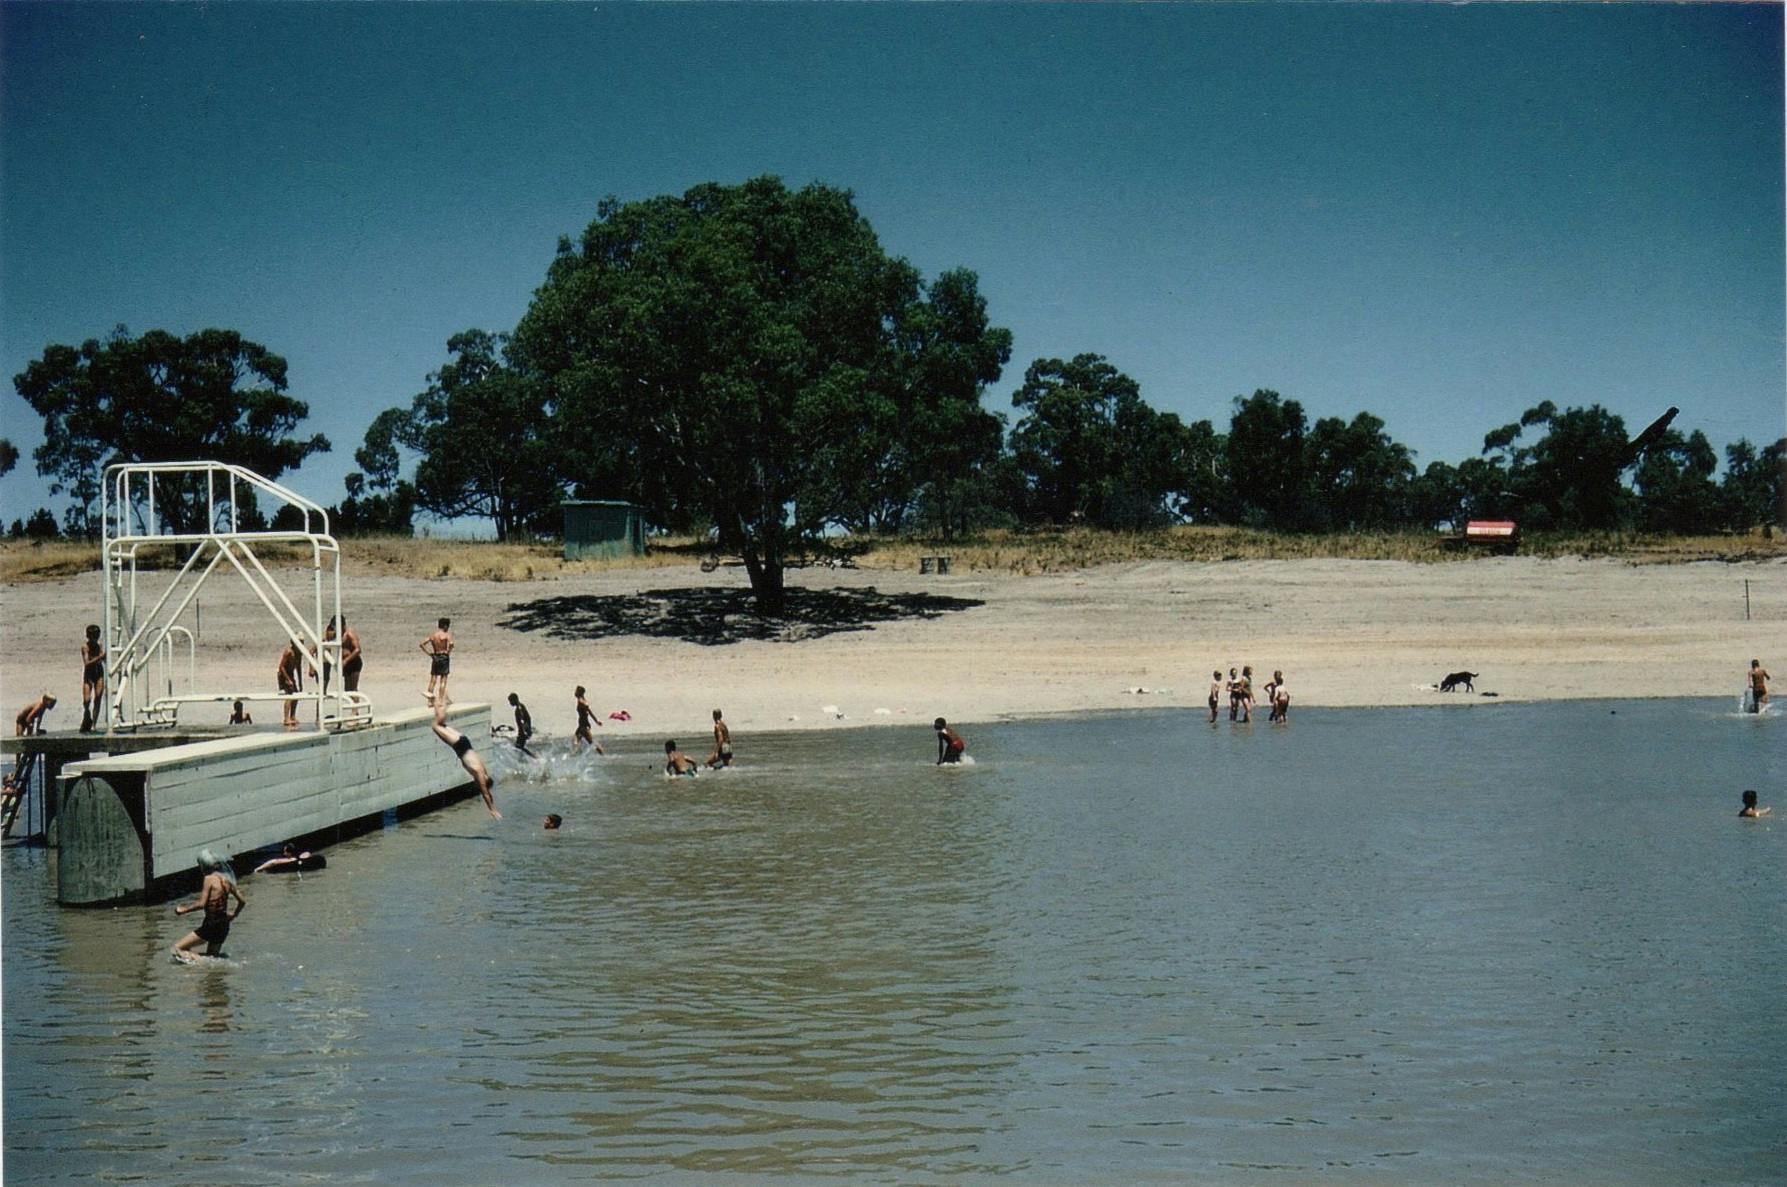 People couldn't wait to get in the lake when it started filling many years ago - and the same still happens today!